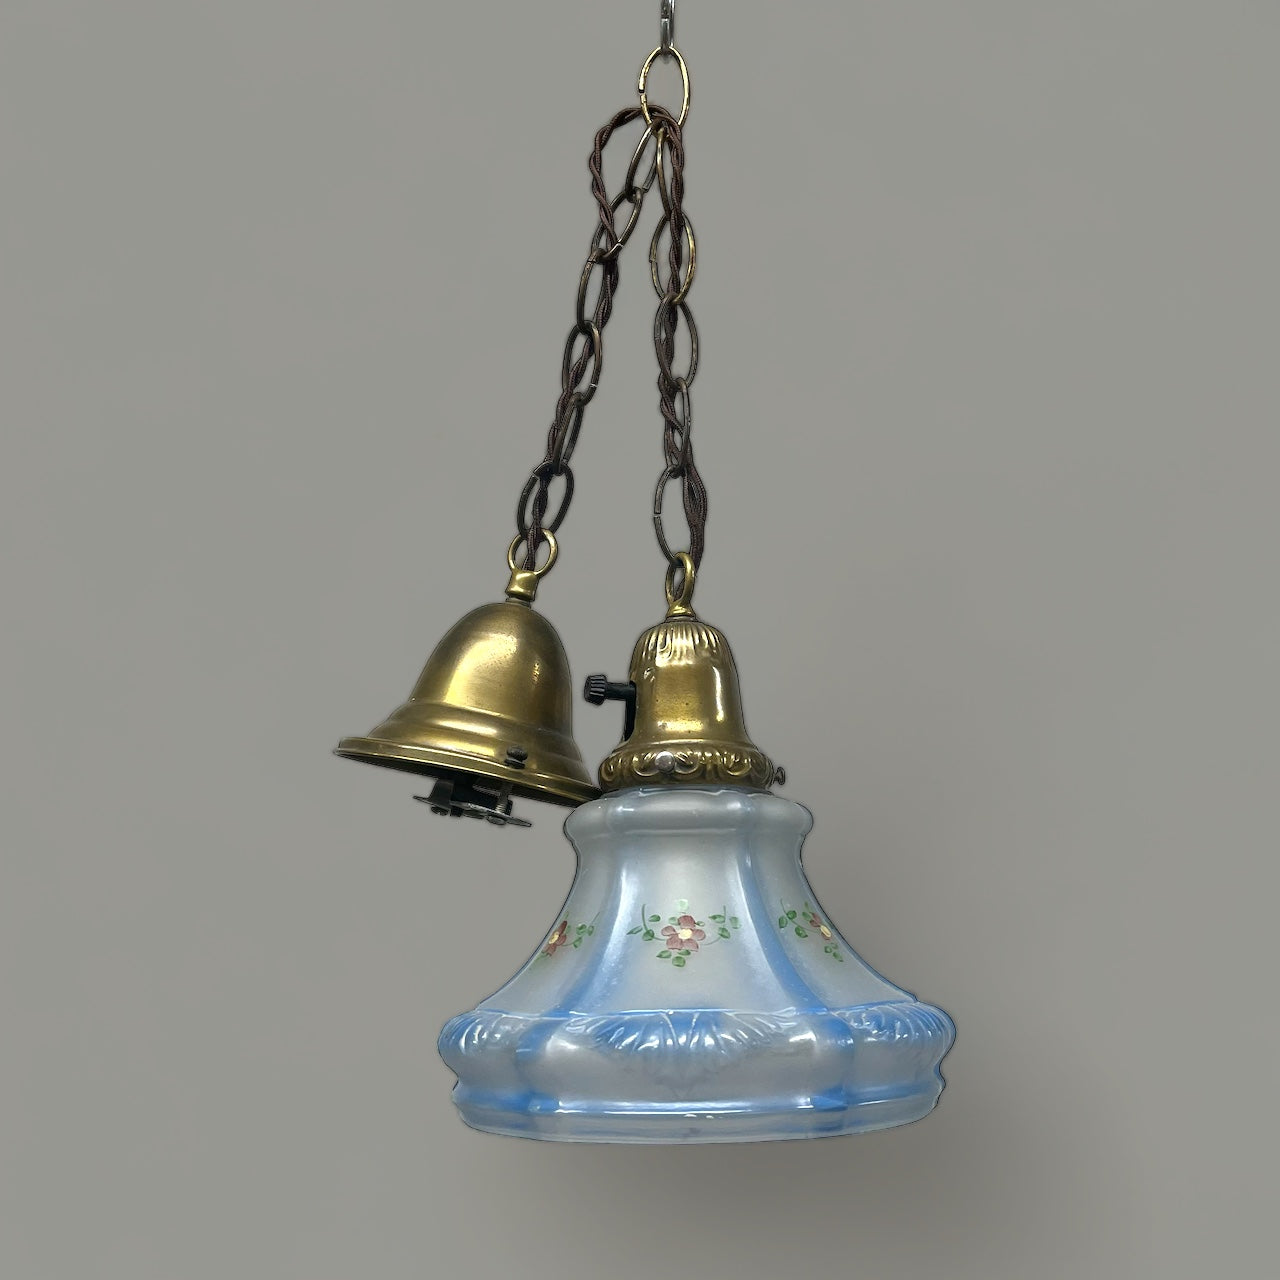 Antique Brass Pendant Light with Hand-Painted Frosted Blue Glass Shade - Rewired